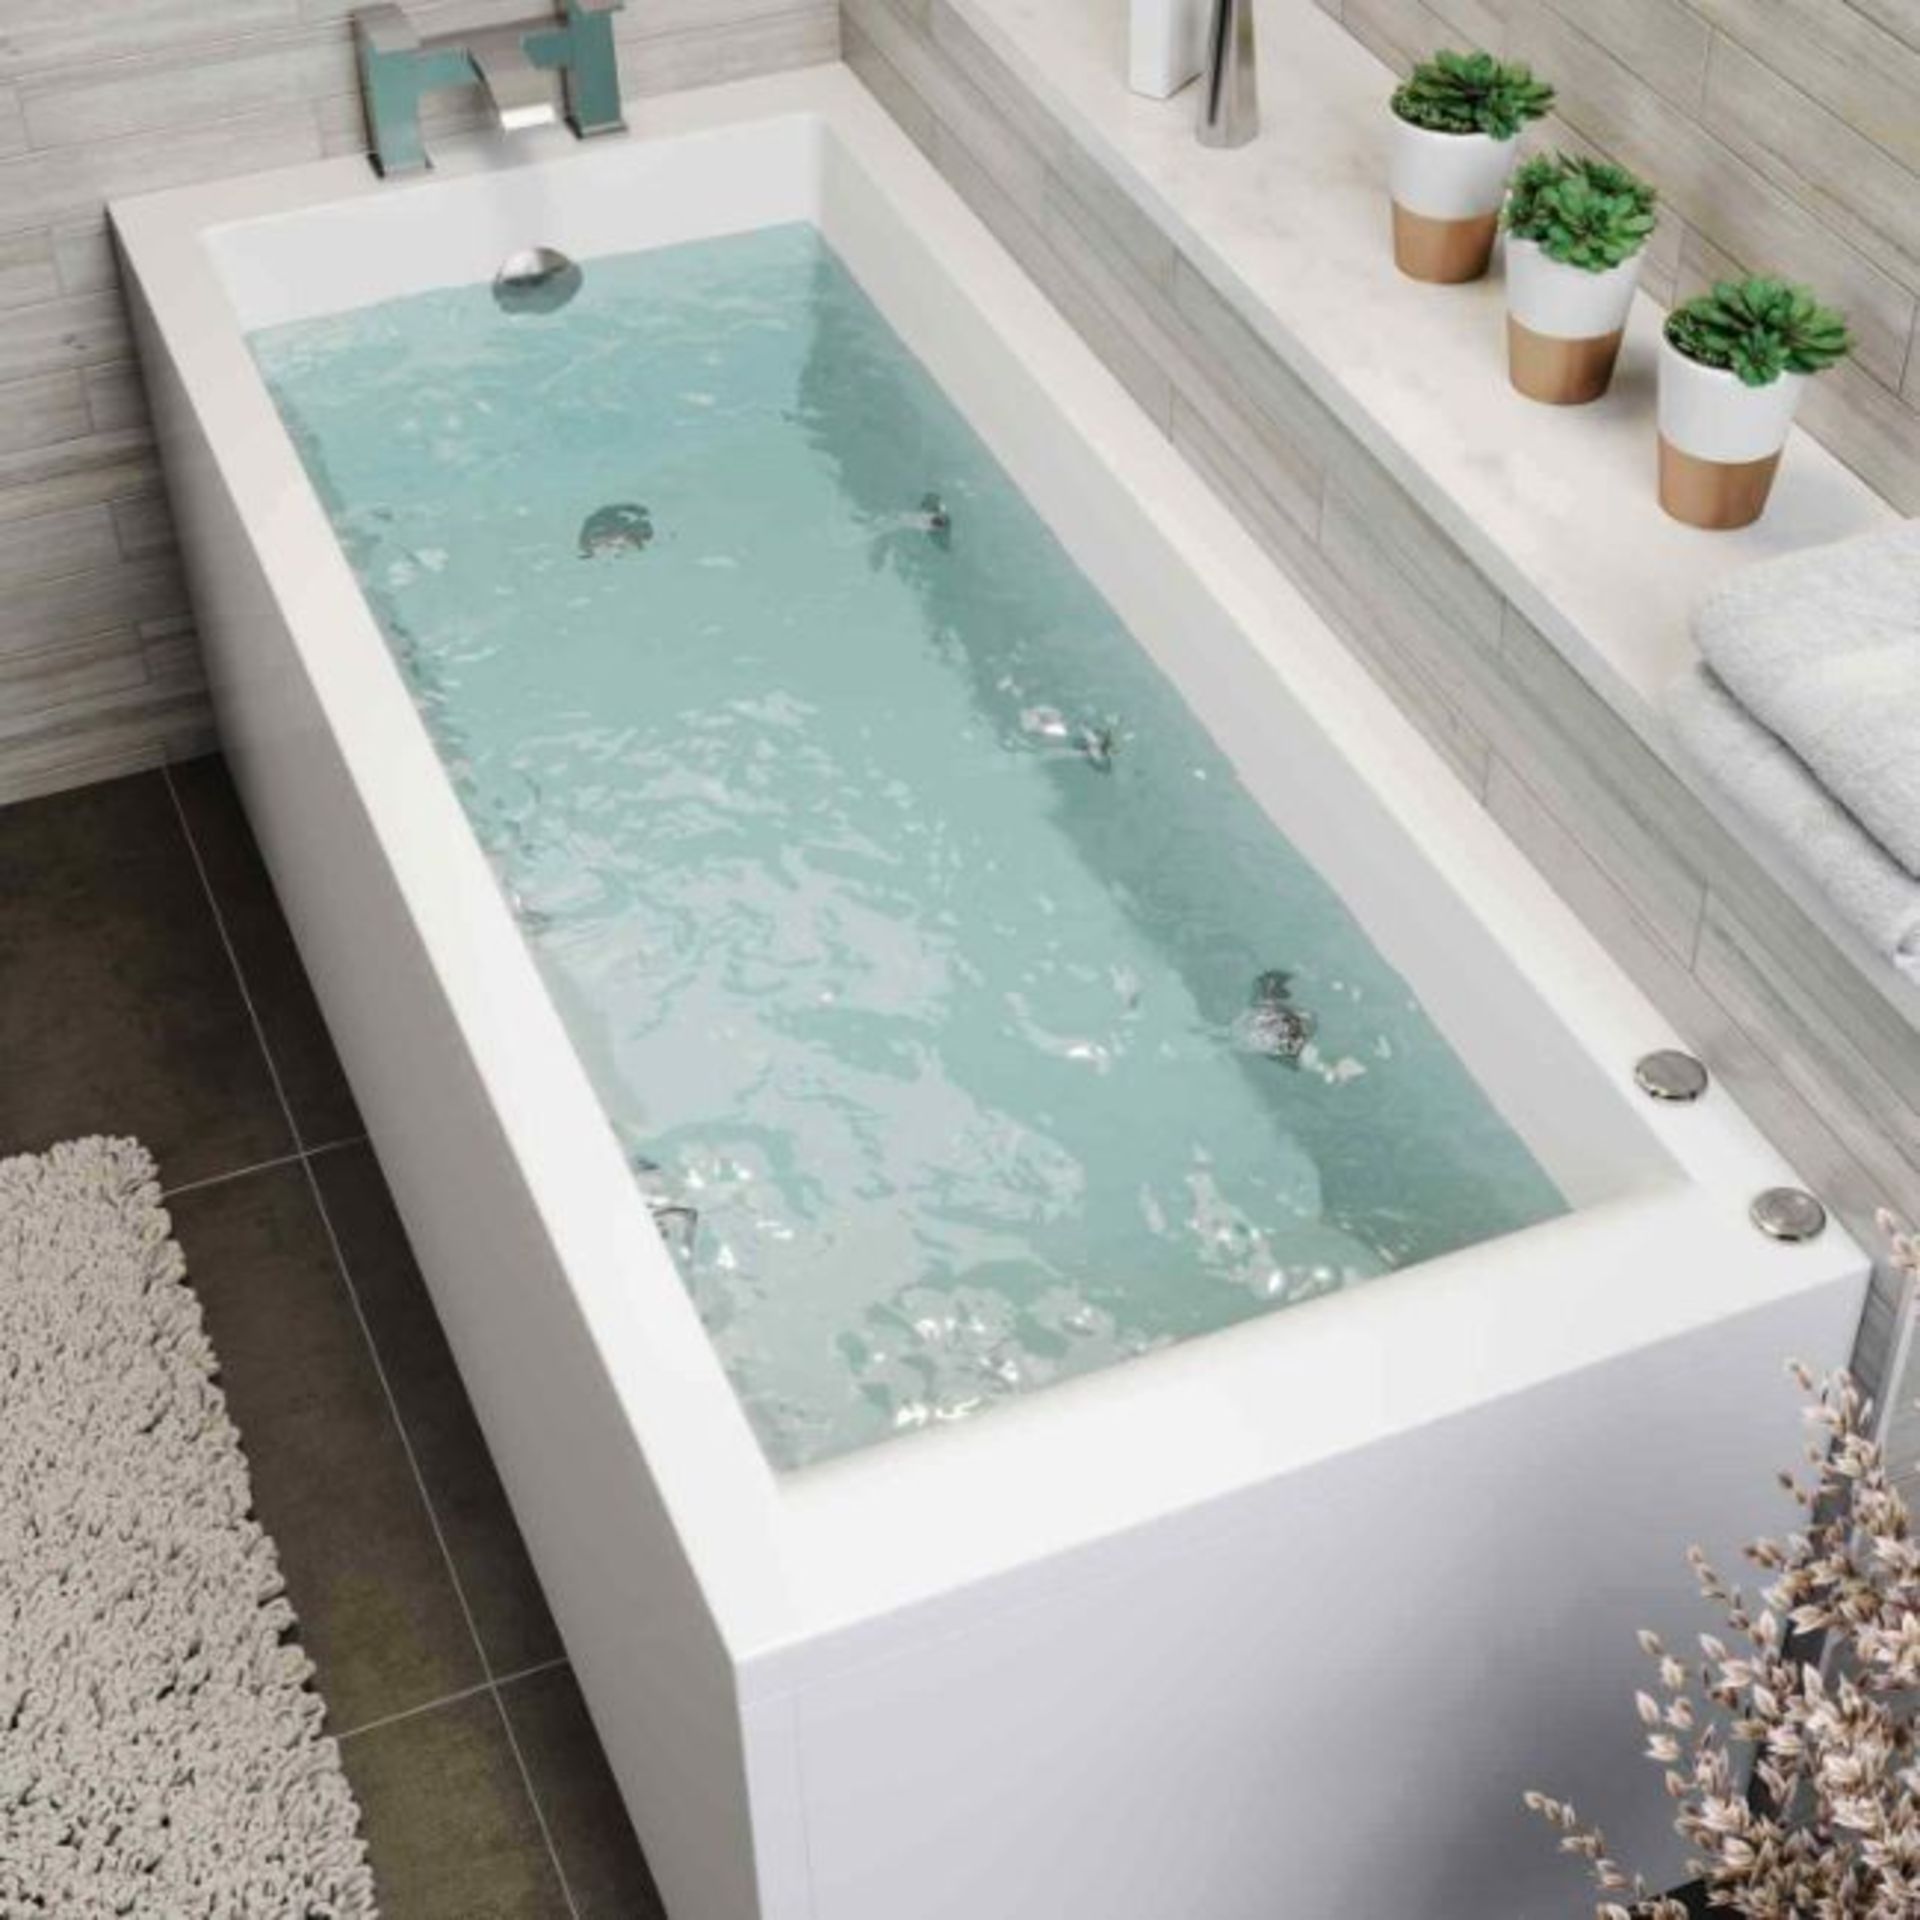 NEW 1700x700x545mm Whirlpool Jacuzzi Single Ended Bath - 6 Jets. RRP £1,299.99.Spa Experience...